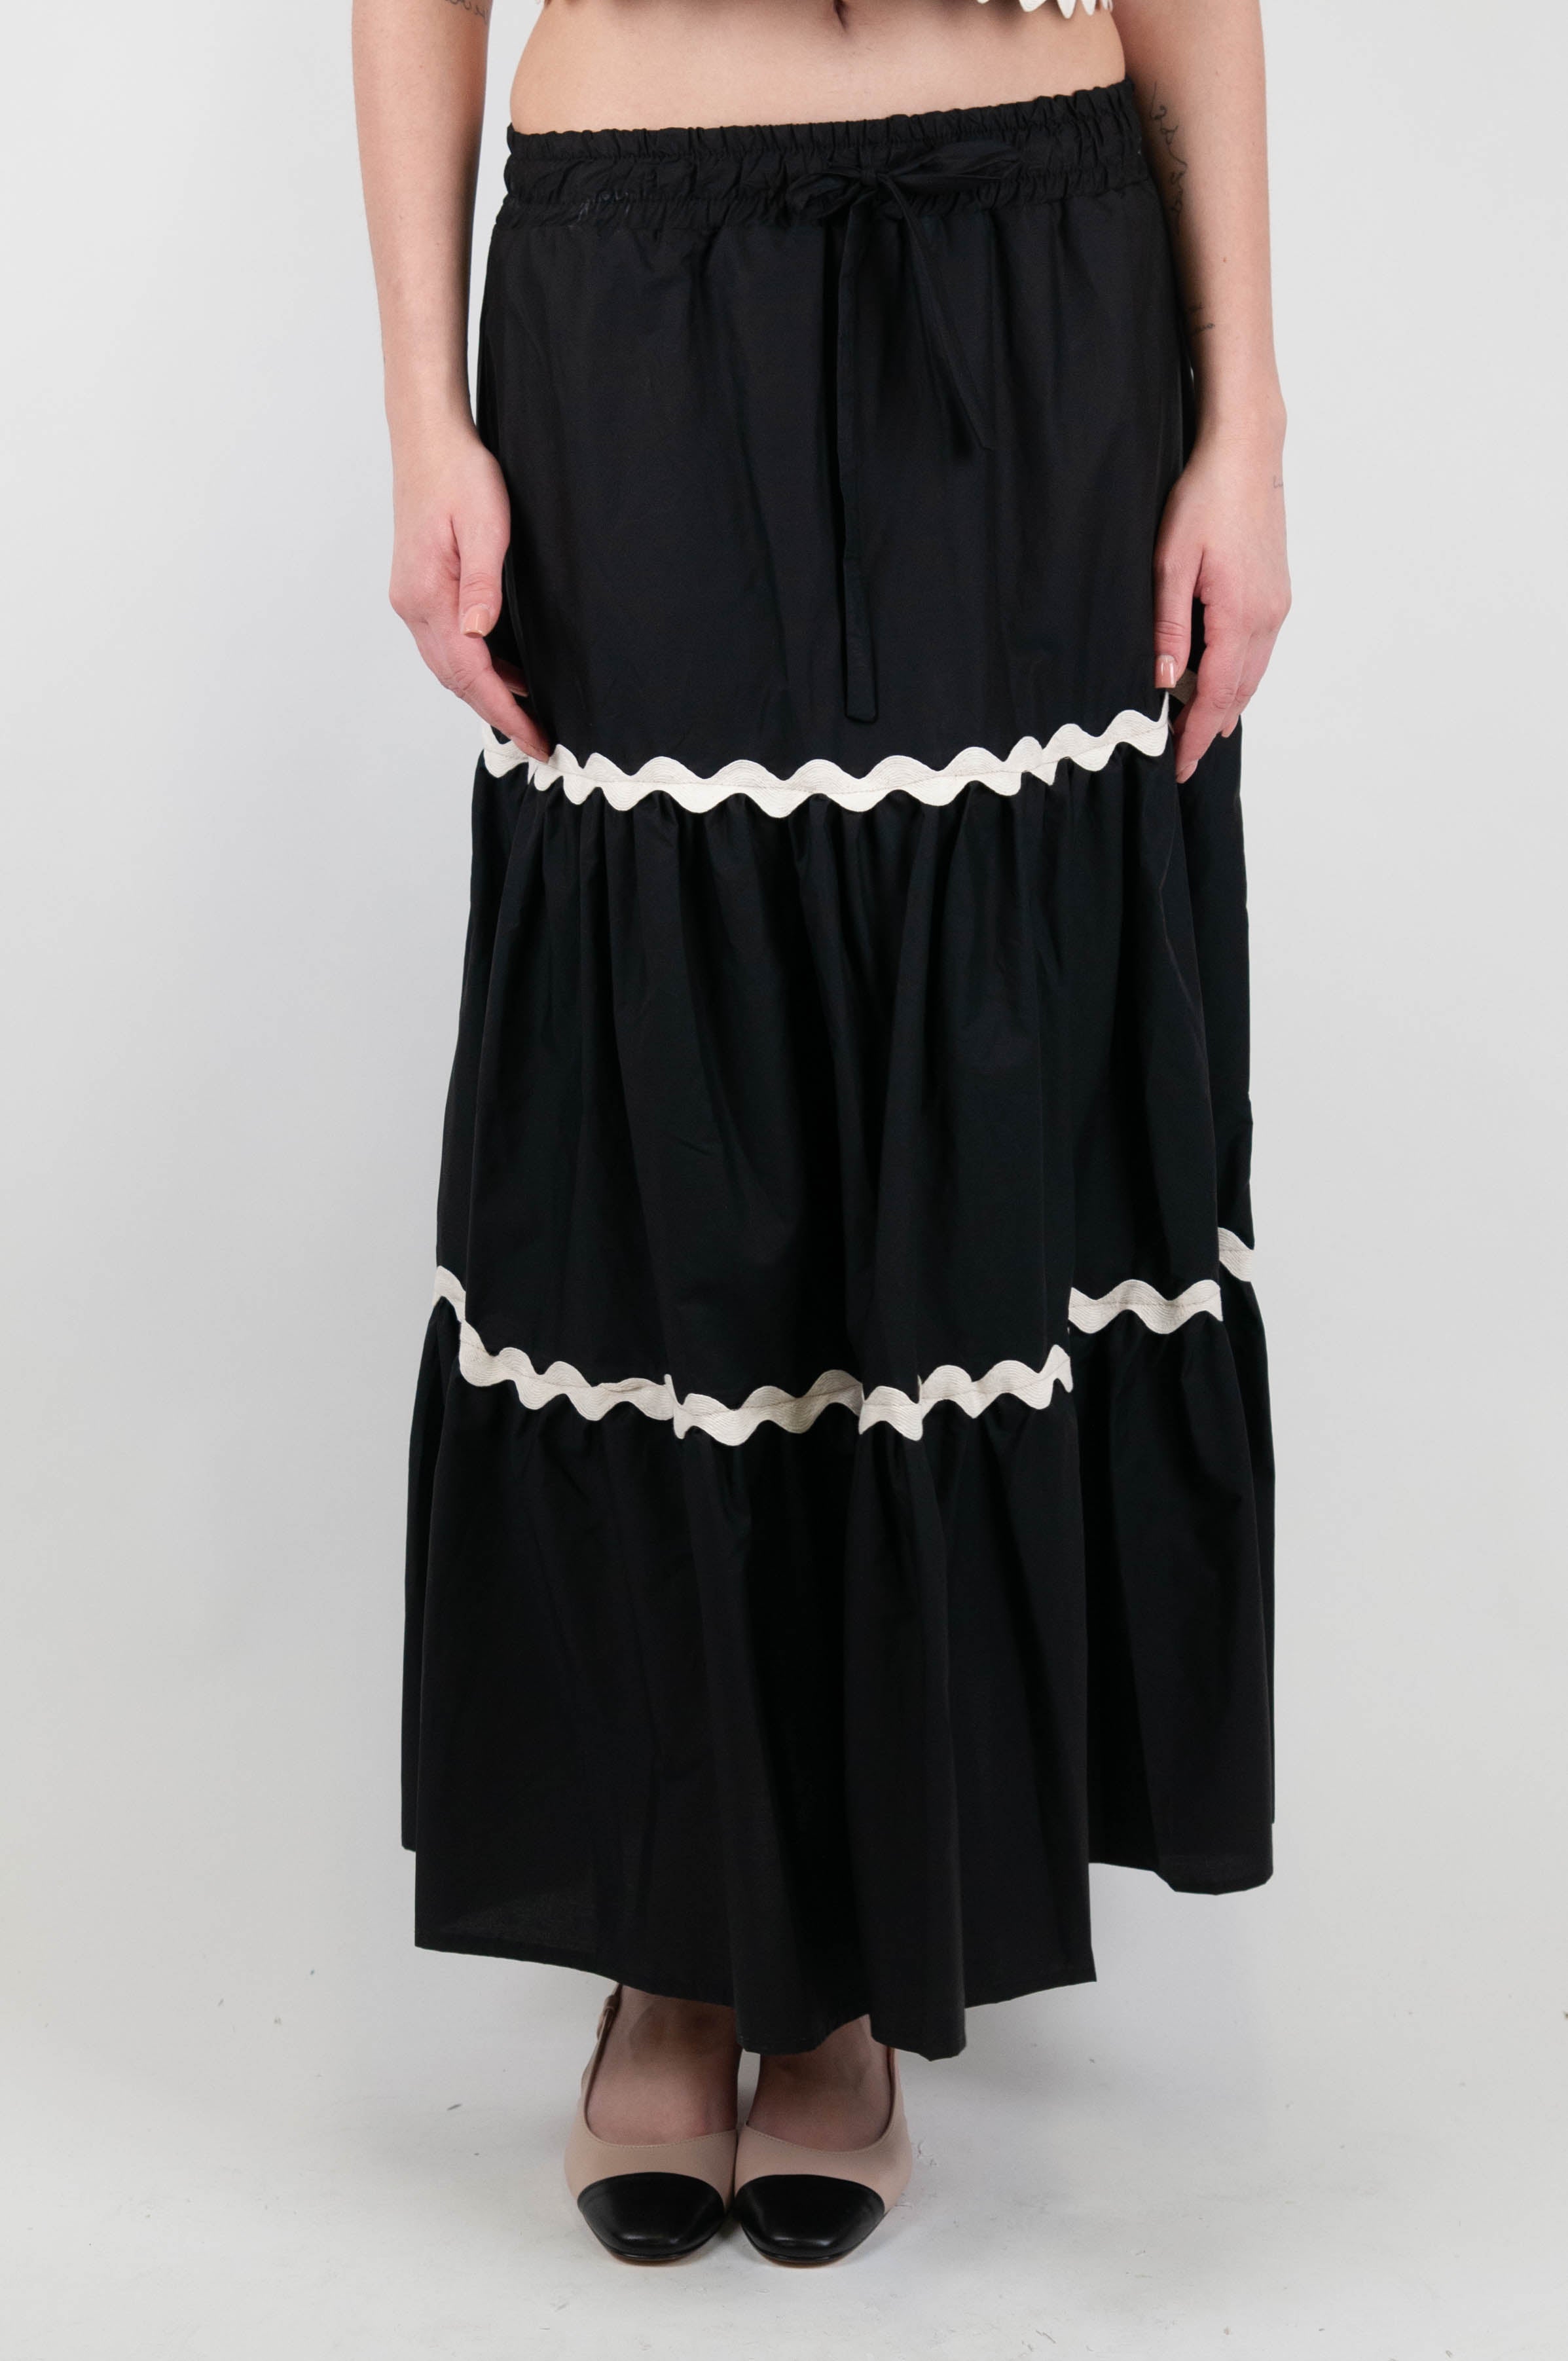 Tension in - Skirt with contrasting flounces and drawstring